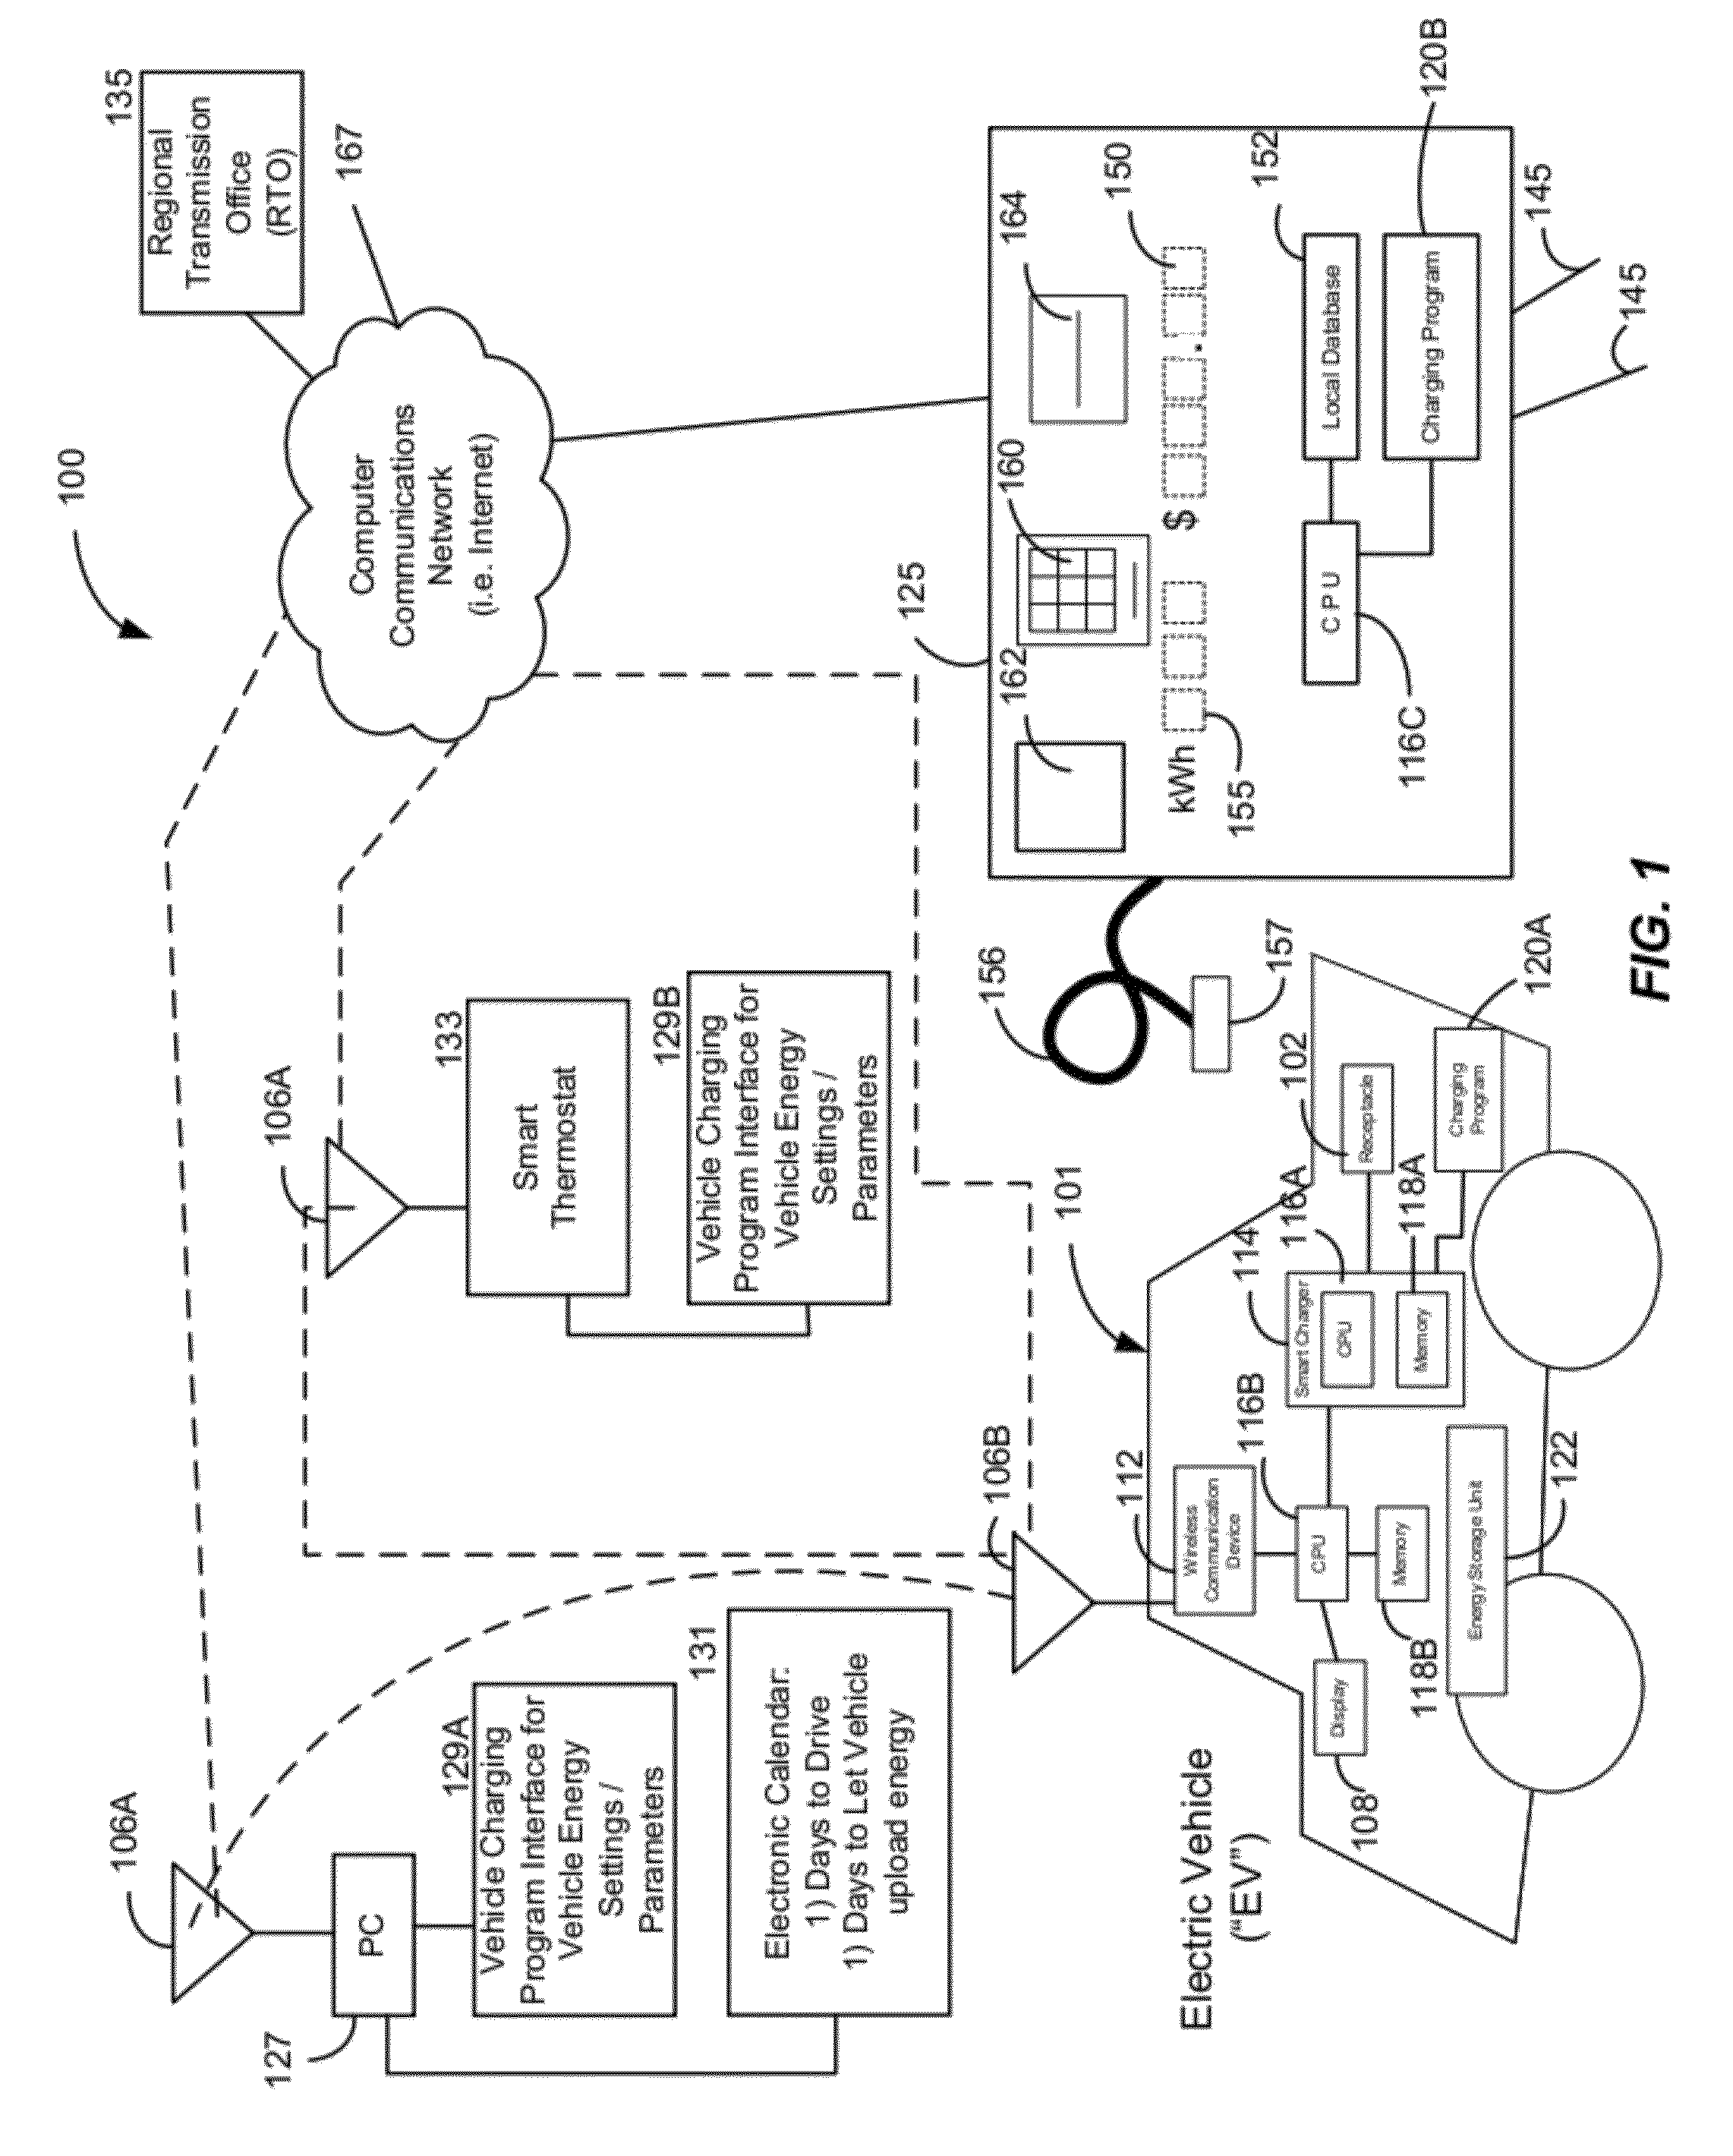 Method and system for charging of electric vehicles according to user defined prices and price off-sets